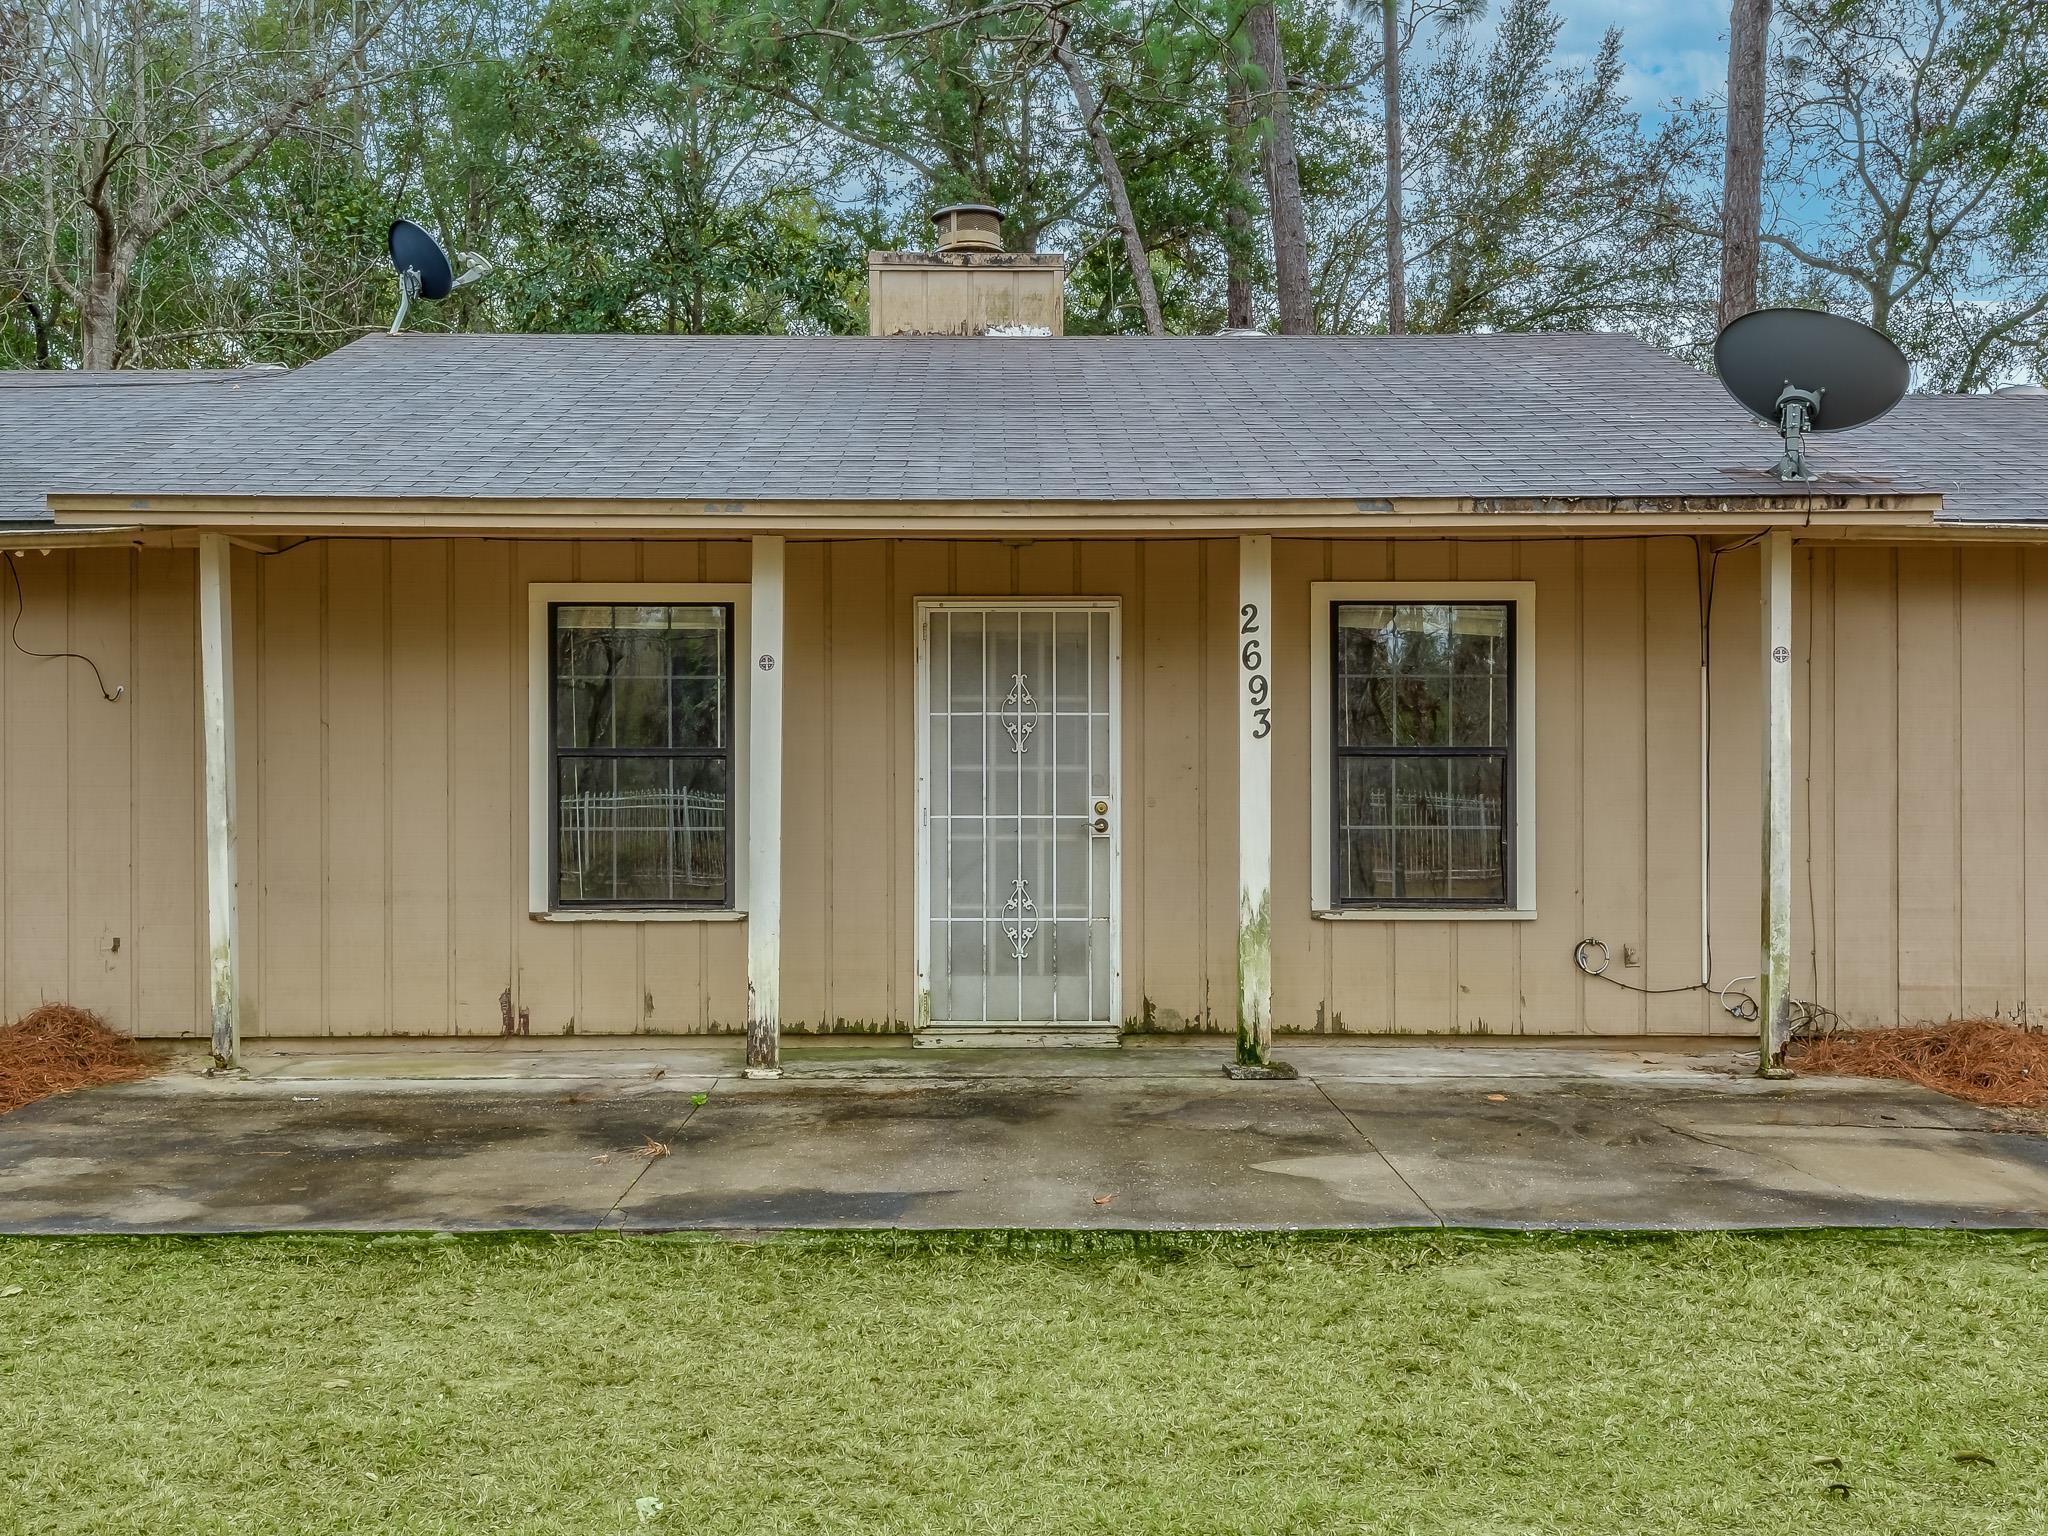 2693 Glover Road,TALLAHASSEE,Florida 32305,3 Bedrooms Bedrooms,2 BathroomsBathrooms,Detached single family,2693 Glover Road,367488